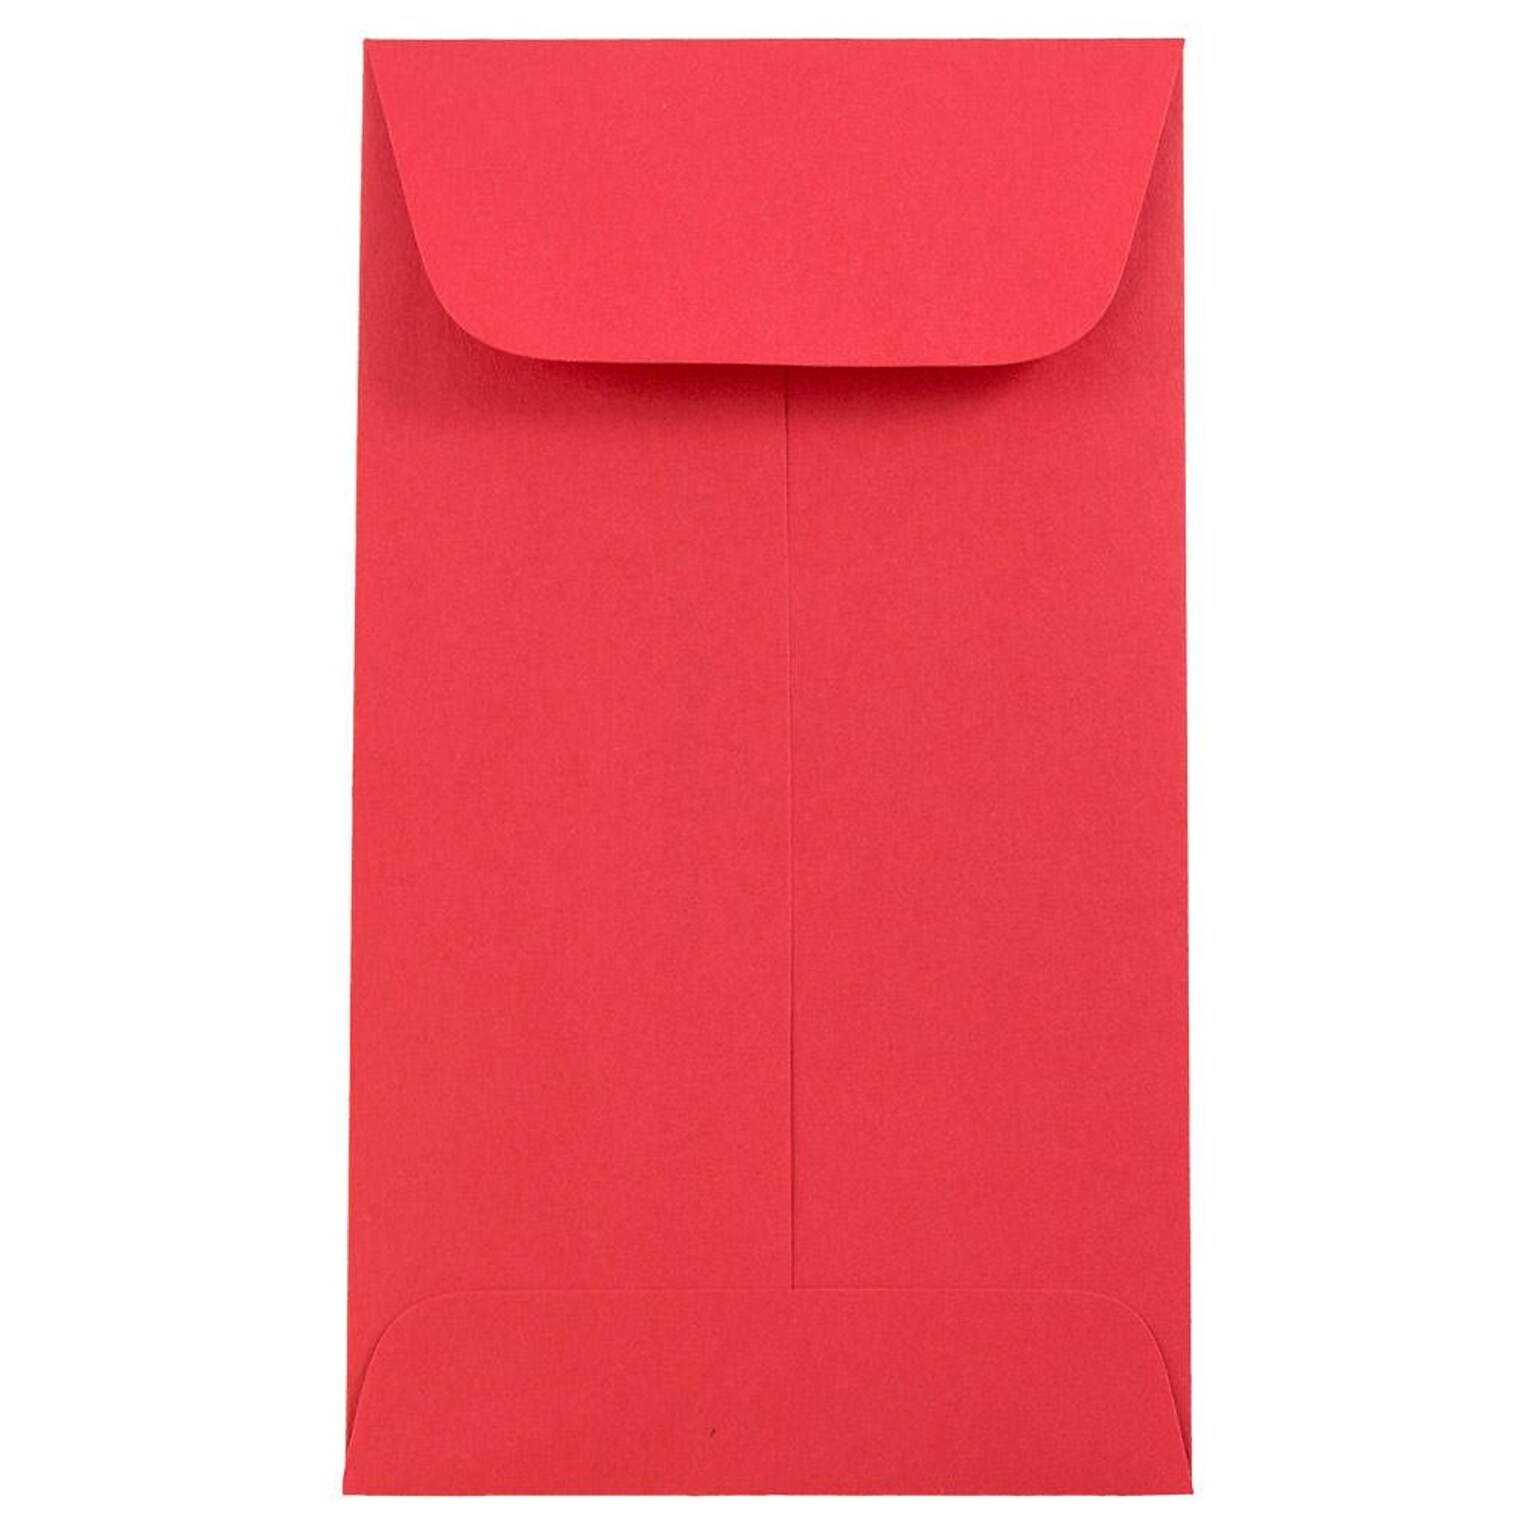 JAM Paper #6 Coin Business Colored Envelopes, 3.375 x 6, Red Recycled, 50/Pack (356730561i)